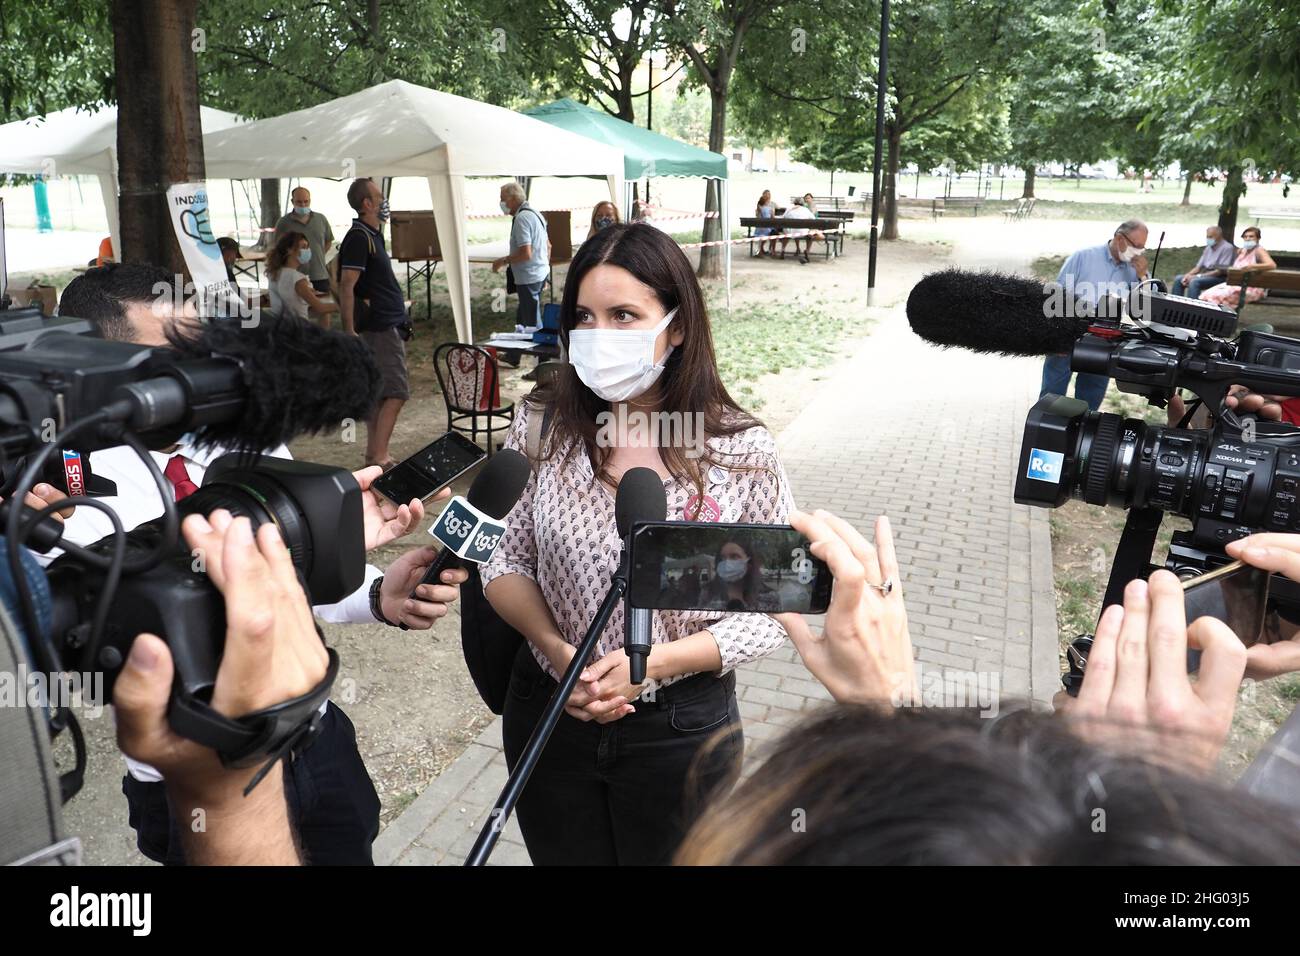 Michele Nucci/LaPresse June 20 , 2021 - Bologna, Italy - news in the pic: Primary election candidate for mayor - candidate Isabella Conti talks to journalists during a press conference at the Velodrome park Stock Photo